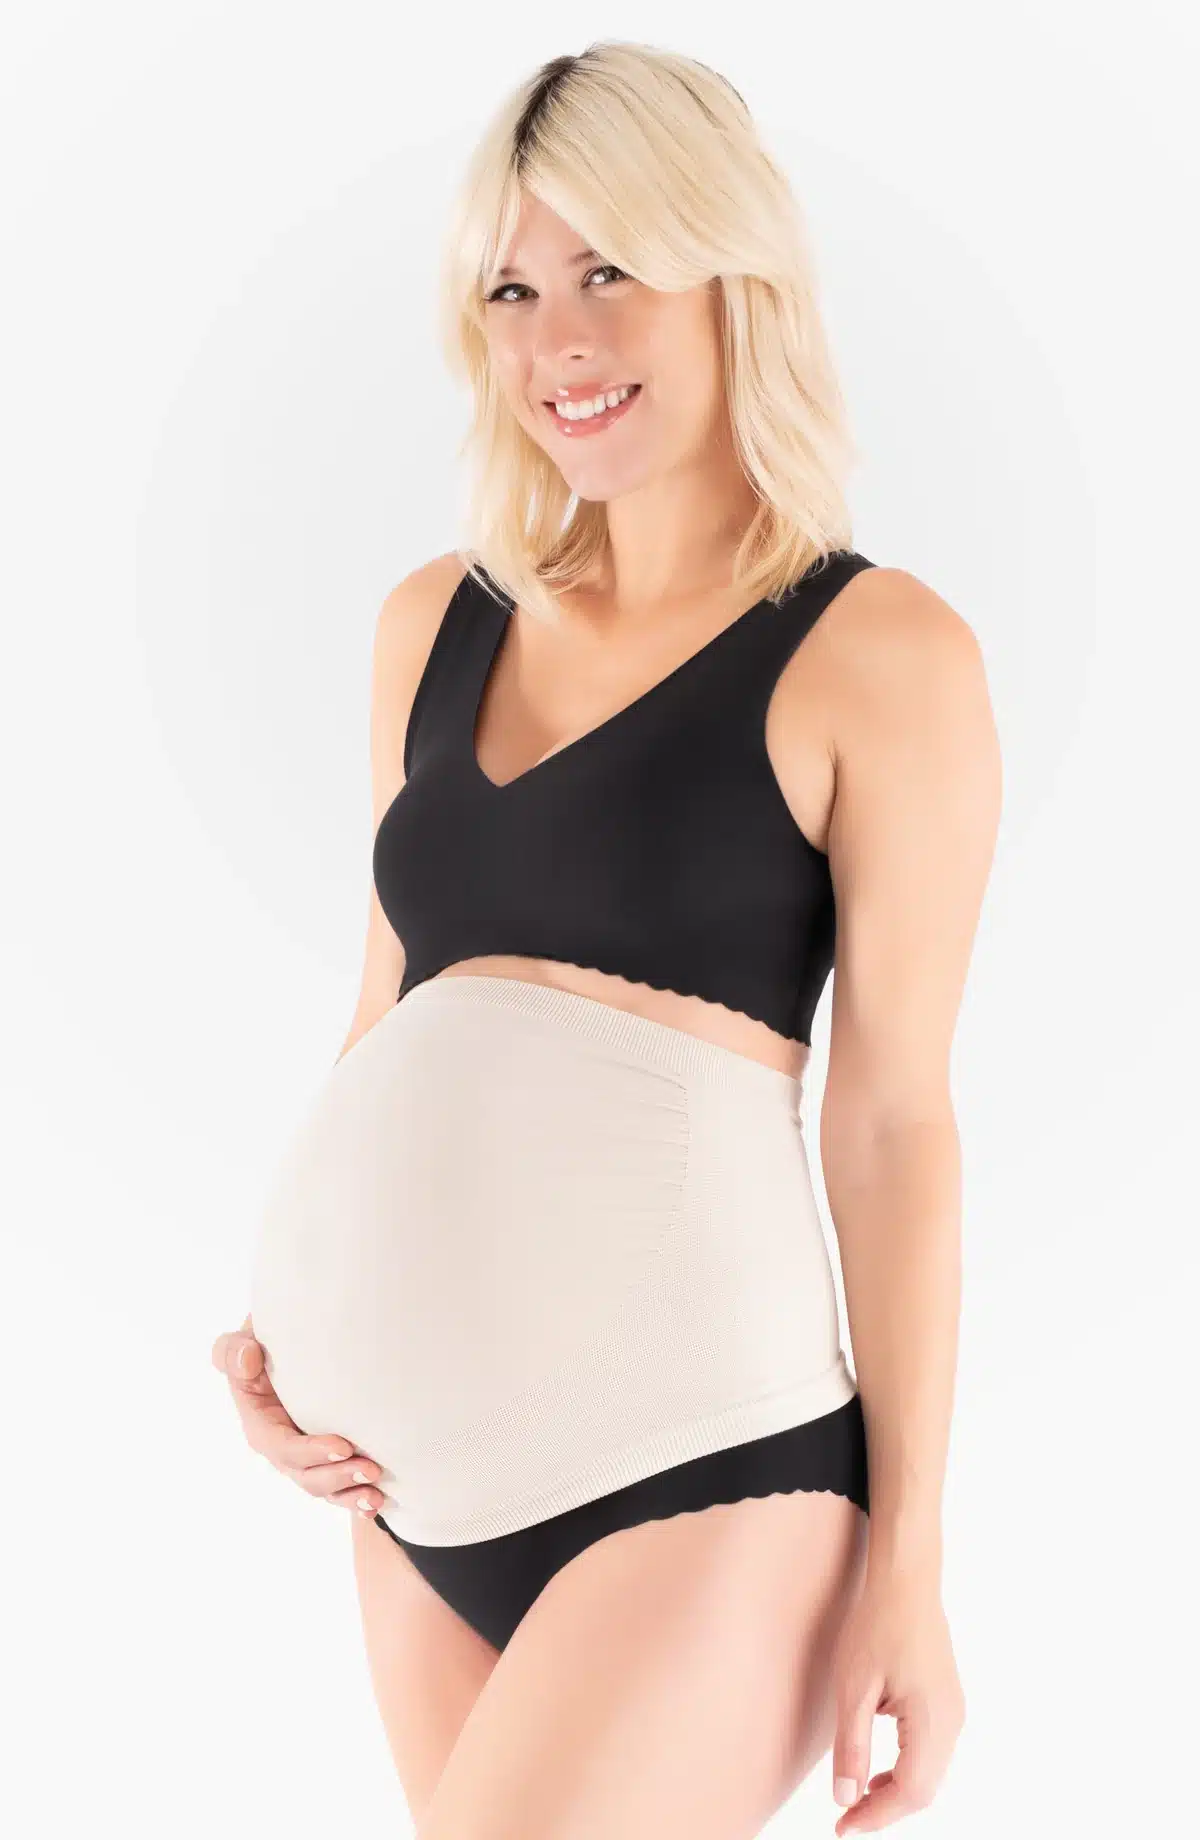 Looking for amazing gifts for pregnant women? Try gifting her this belly support band. | The Dating Divas